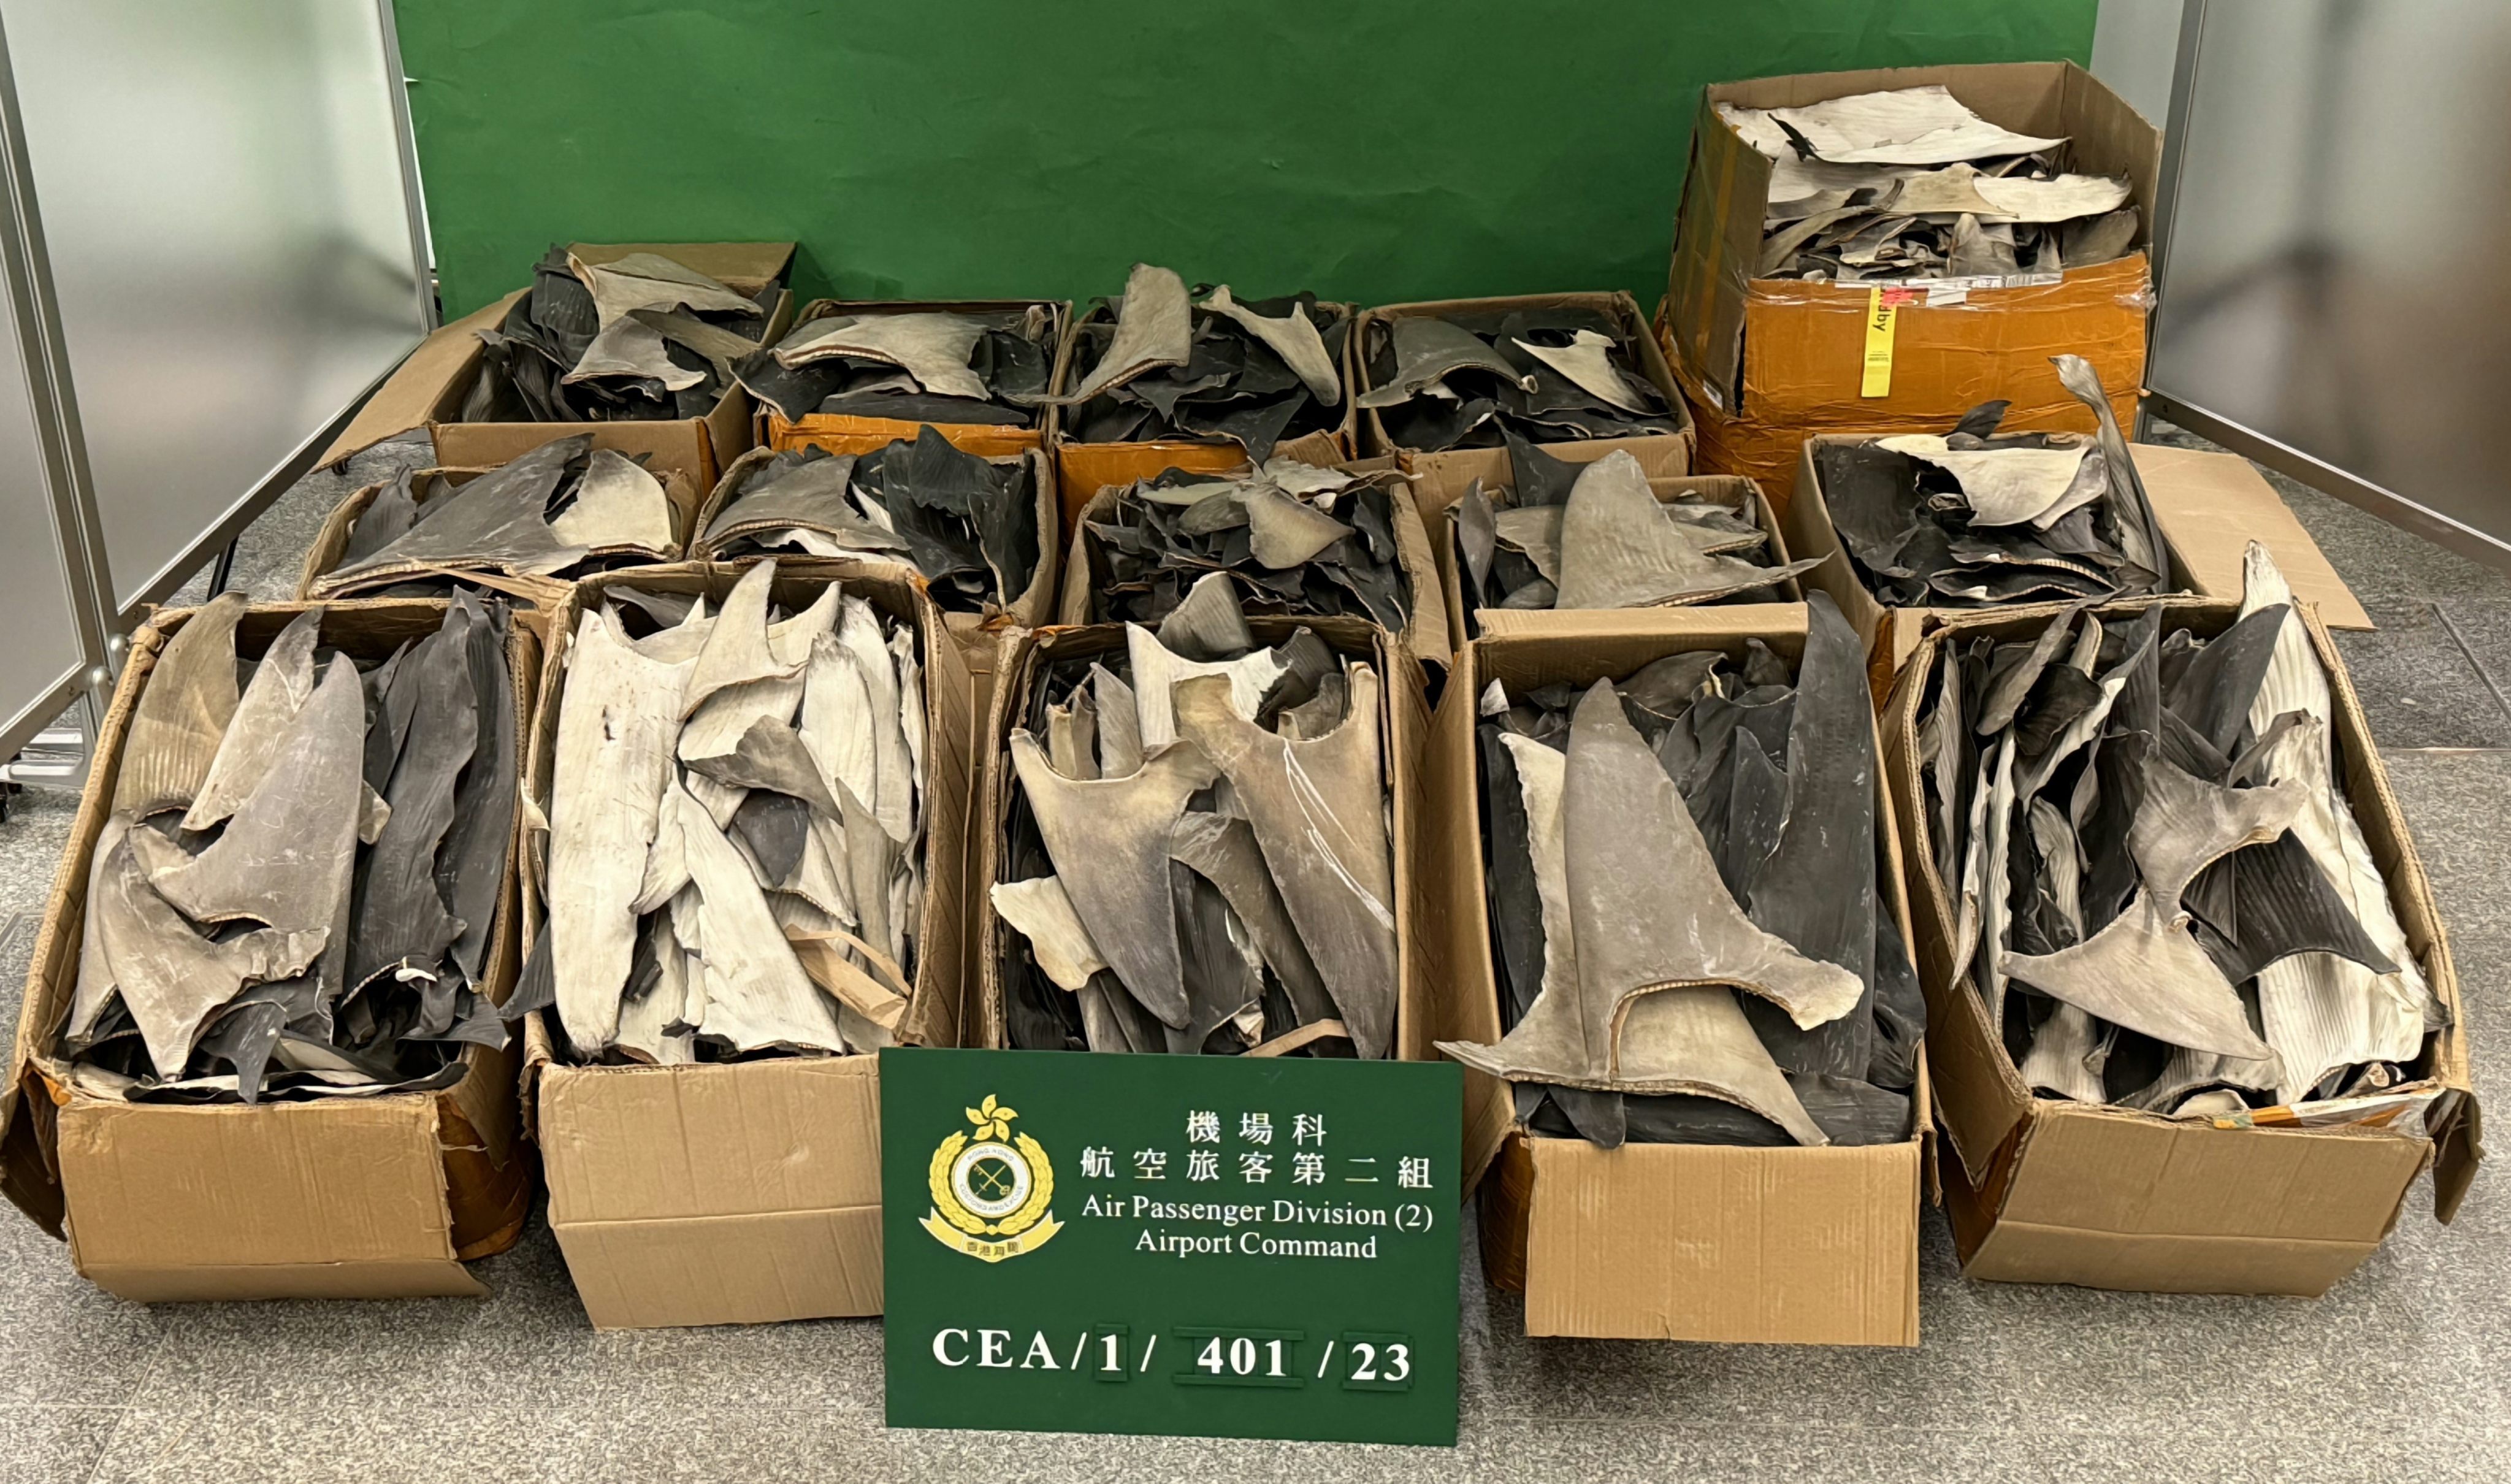 Customs has said it suspects that some of the fins belong to sharks from endangered species. Photo: Handout 